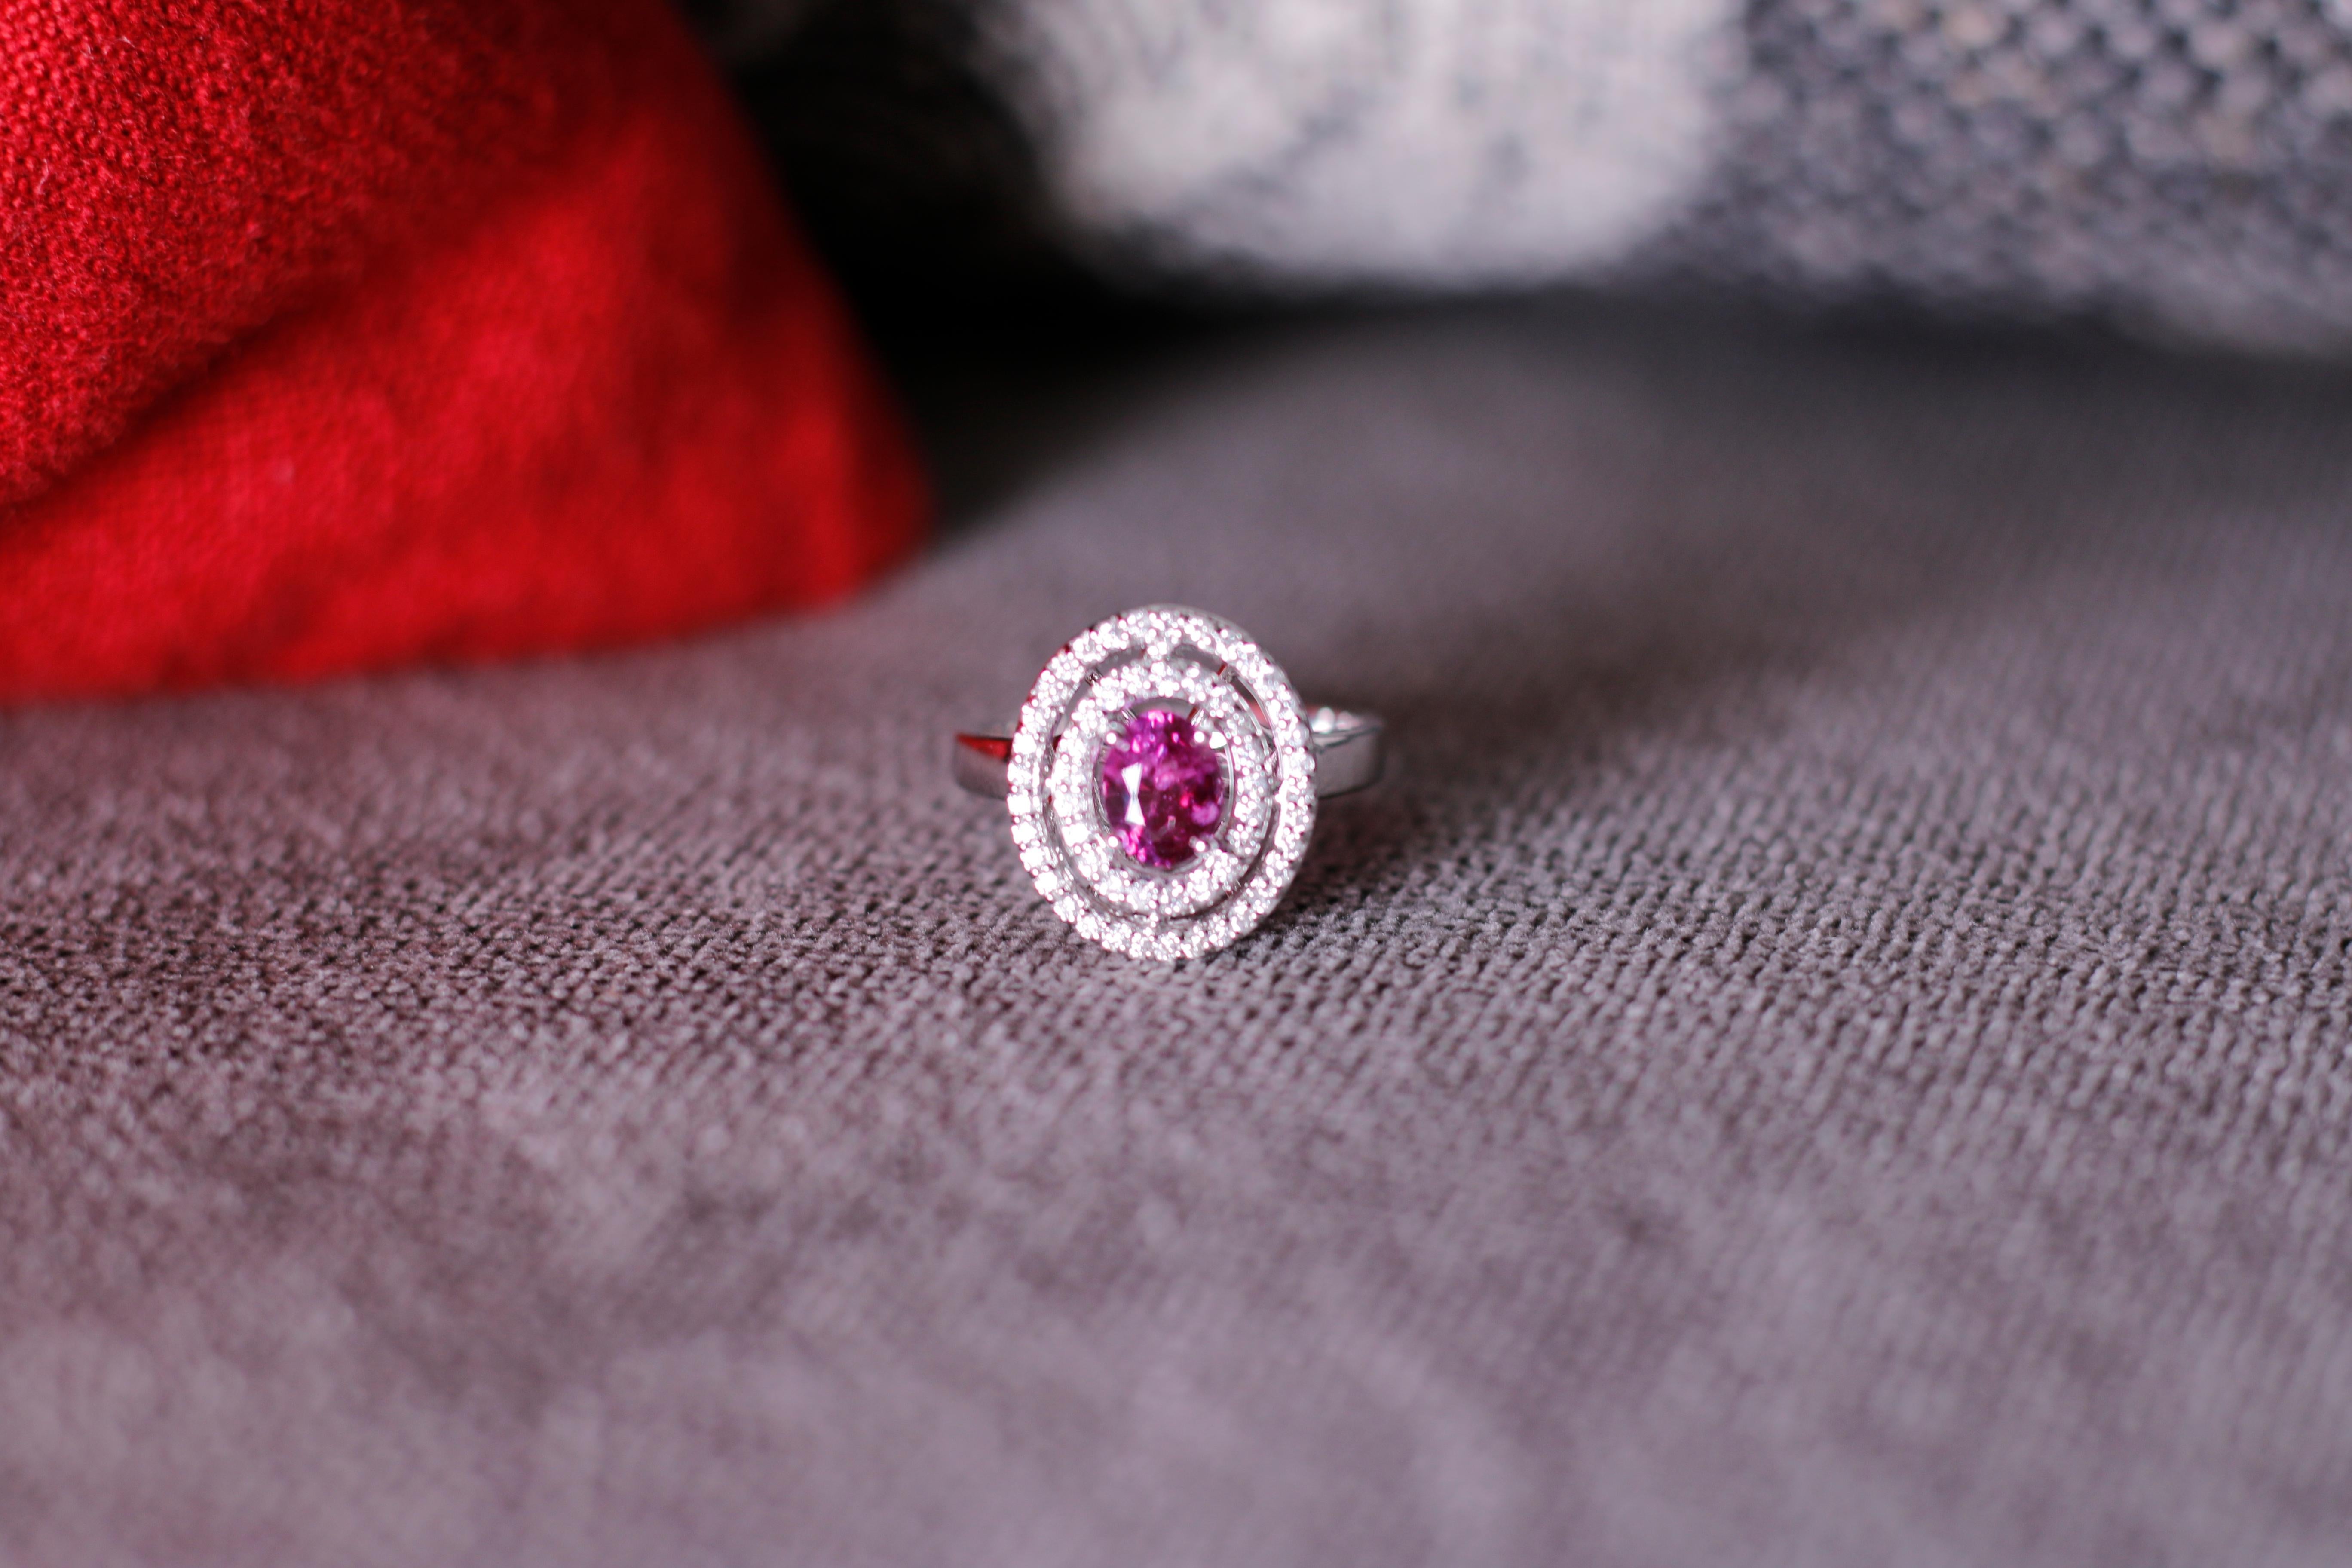 Crafted with a high luster Pink Sapphire stone (1.12ct) from Sri Lanka, this is a one of kind ring that can truly make a statement. Ring is made with 18 karat white gold and Si diamonds. Diamonds are added as a double cluster to give a truly